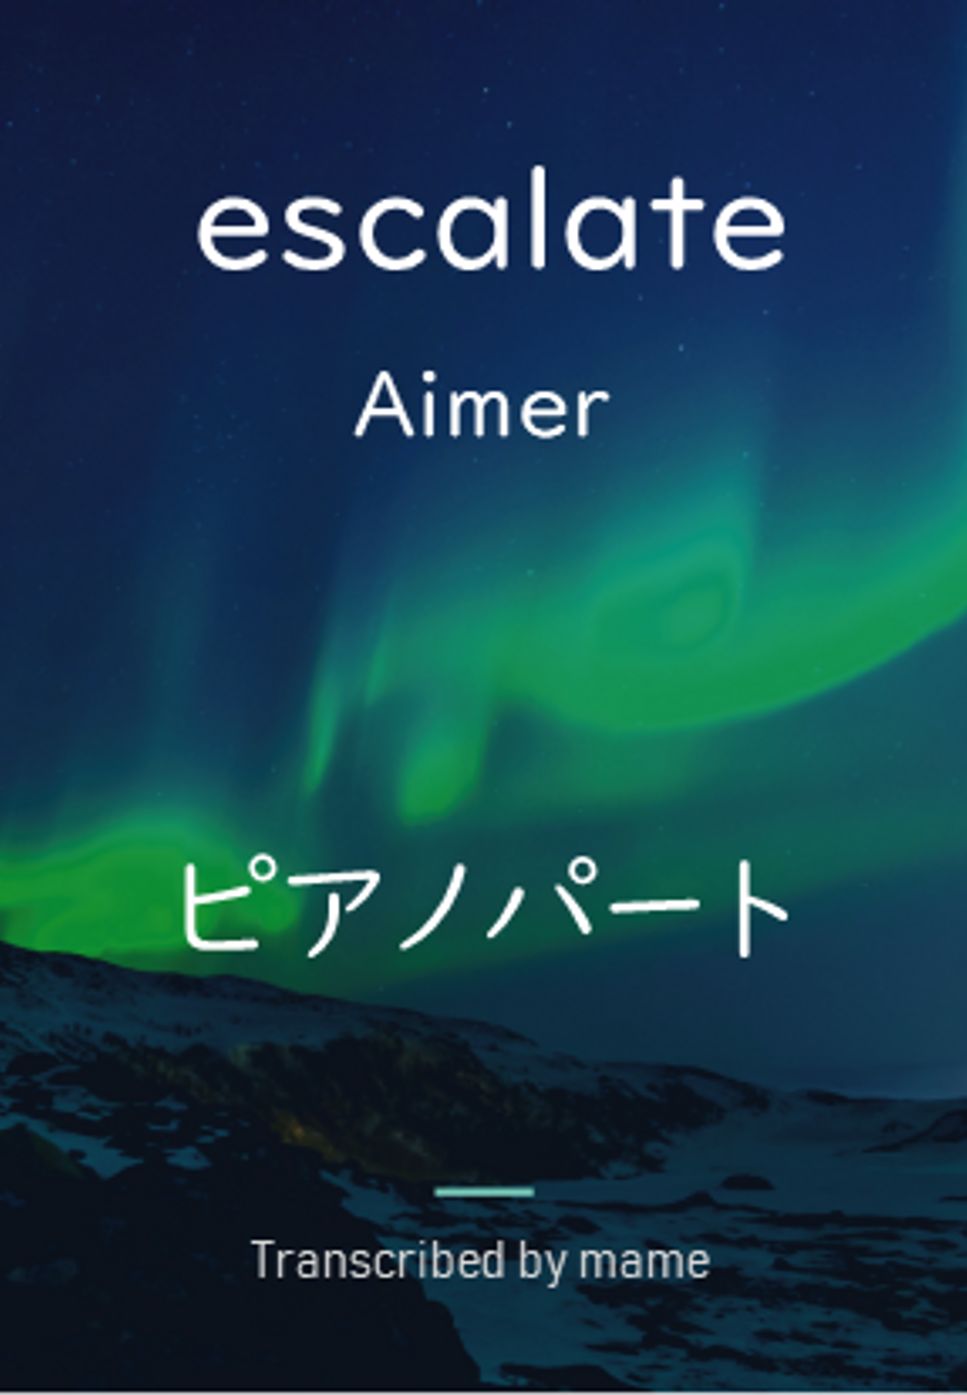 Aimer - escalate (piano part) by mame